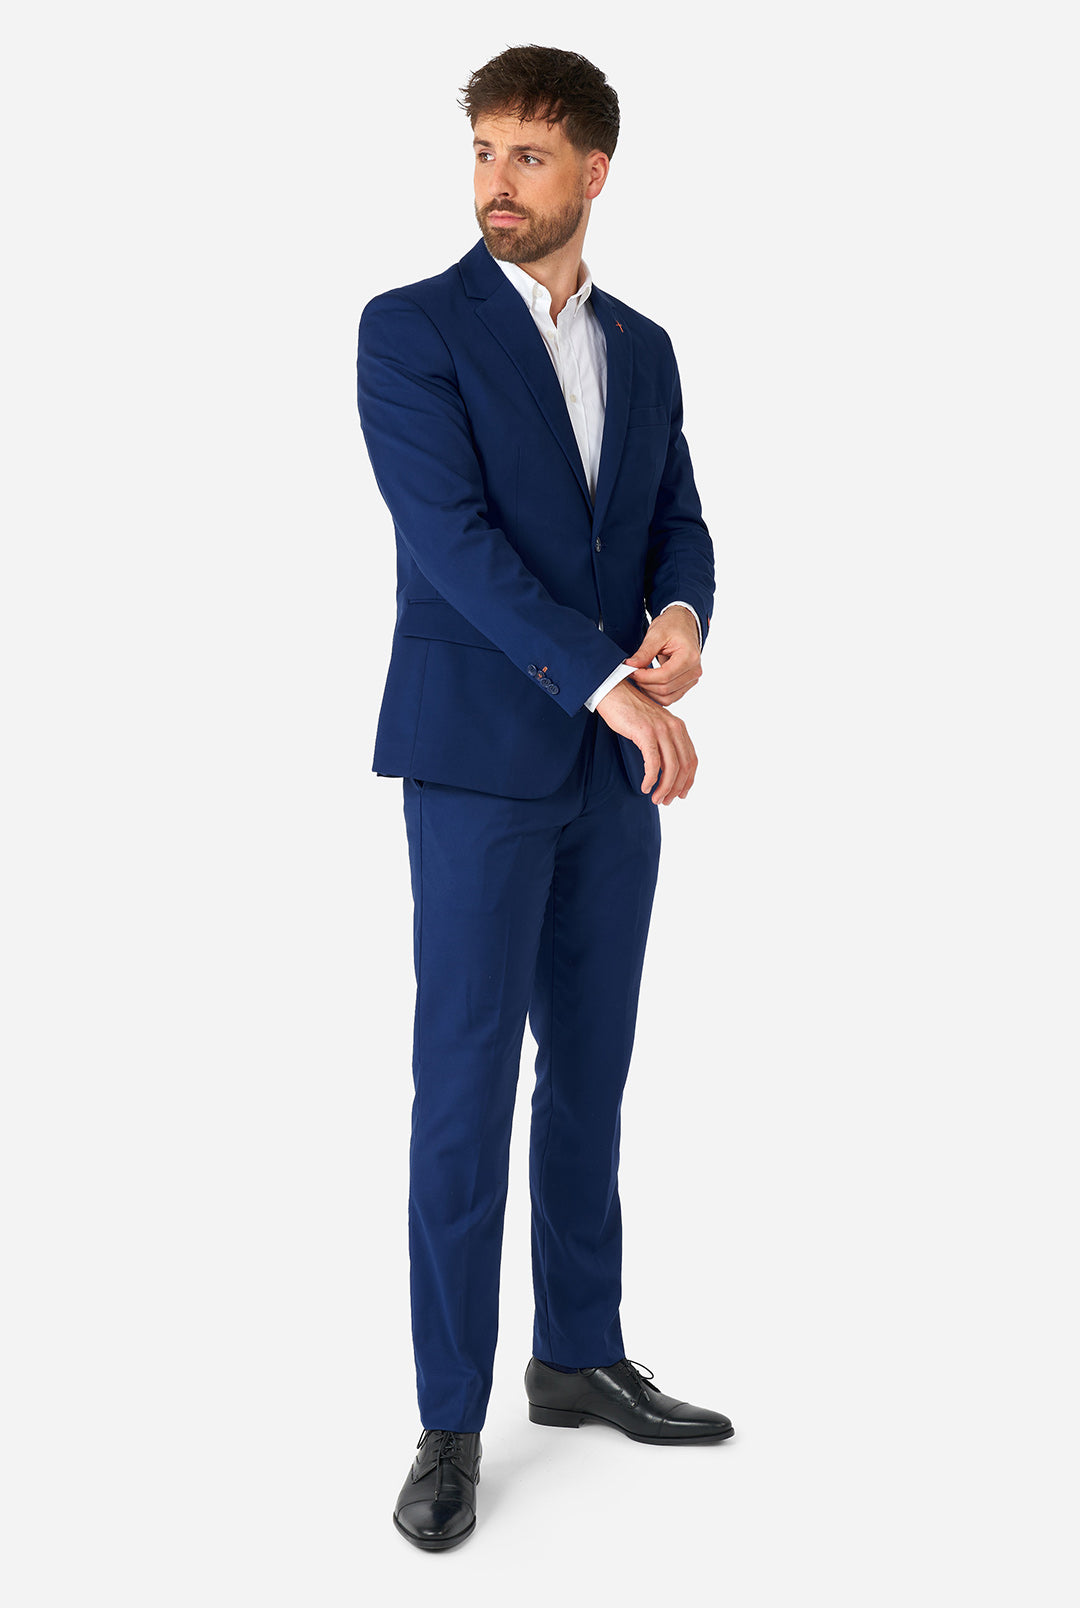 Daily Dark Blue Men's Suit - OppoSuits Daily